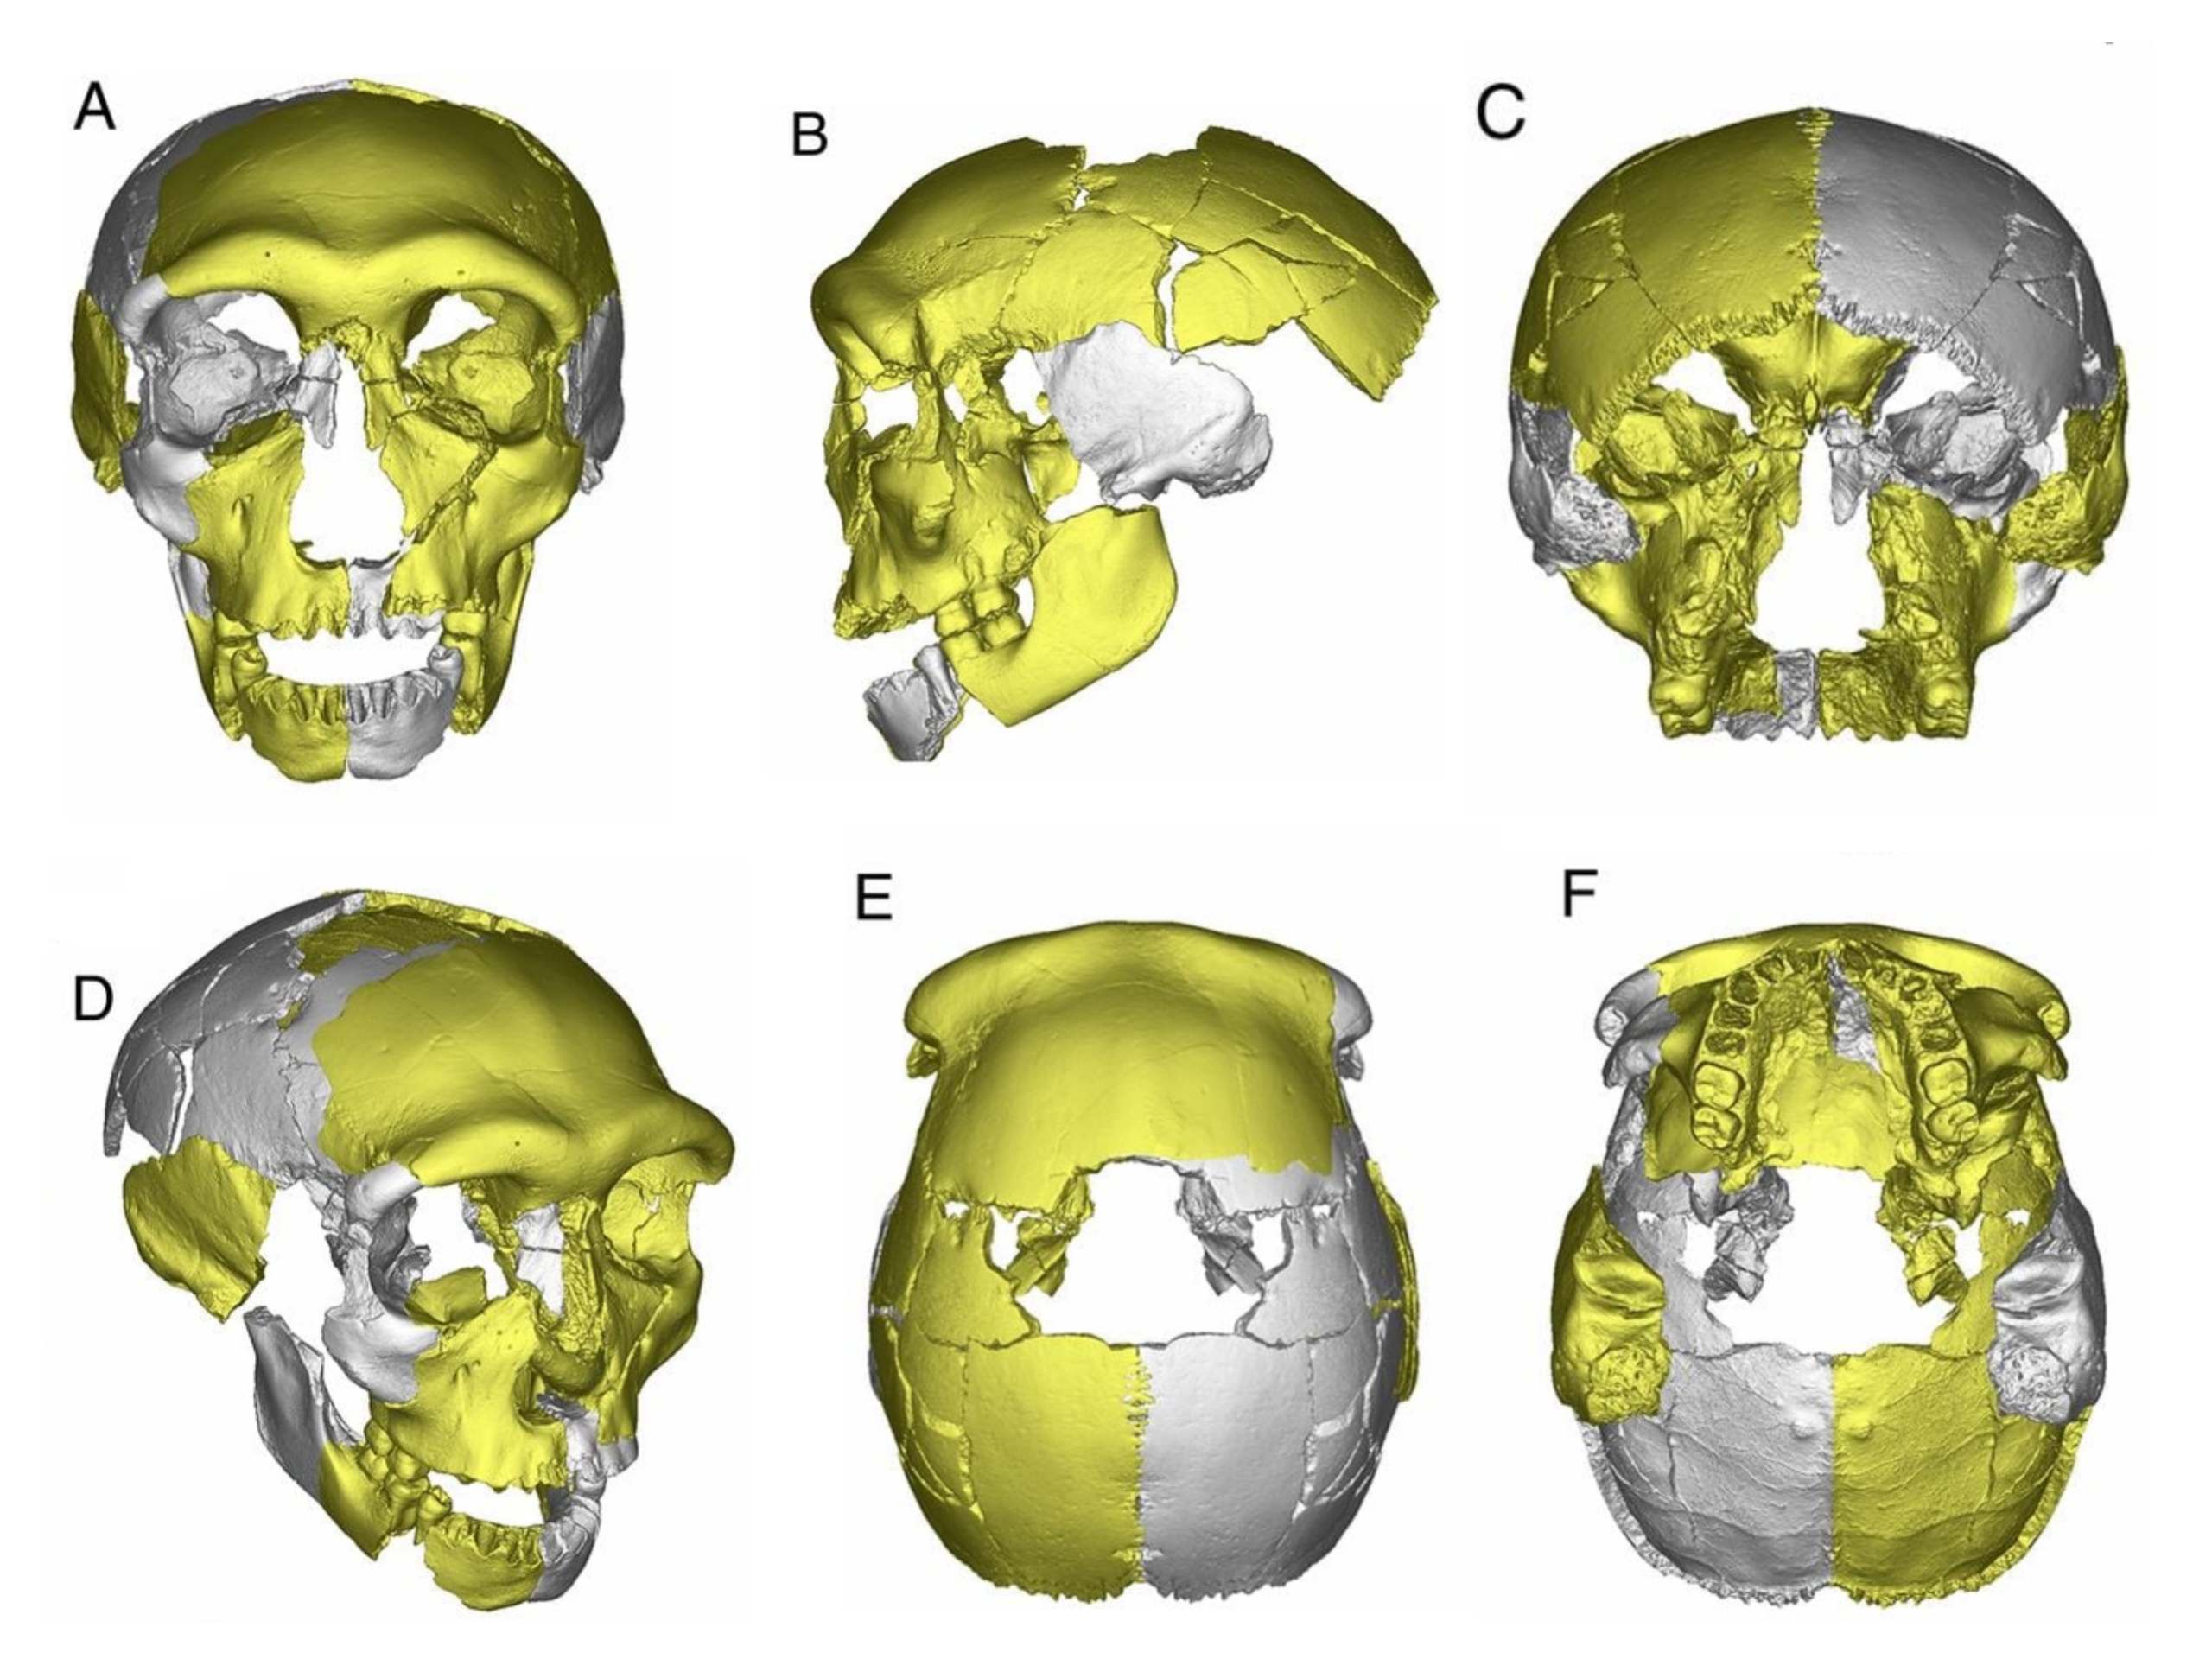 The virtually reconstructed HLD 6 skull